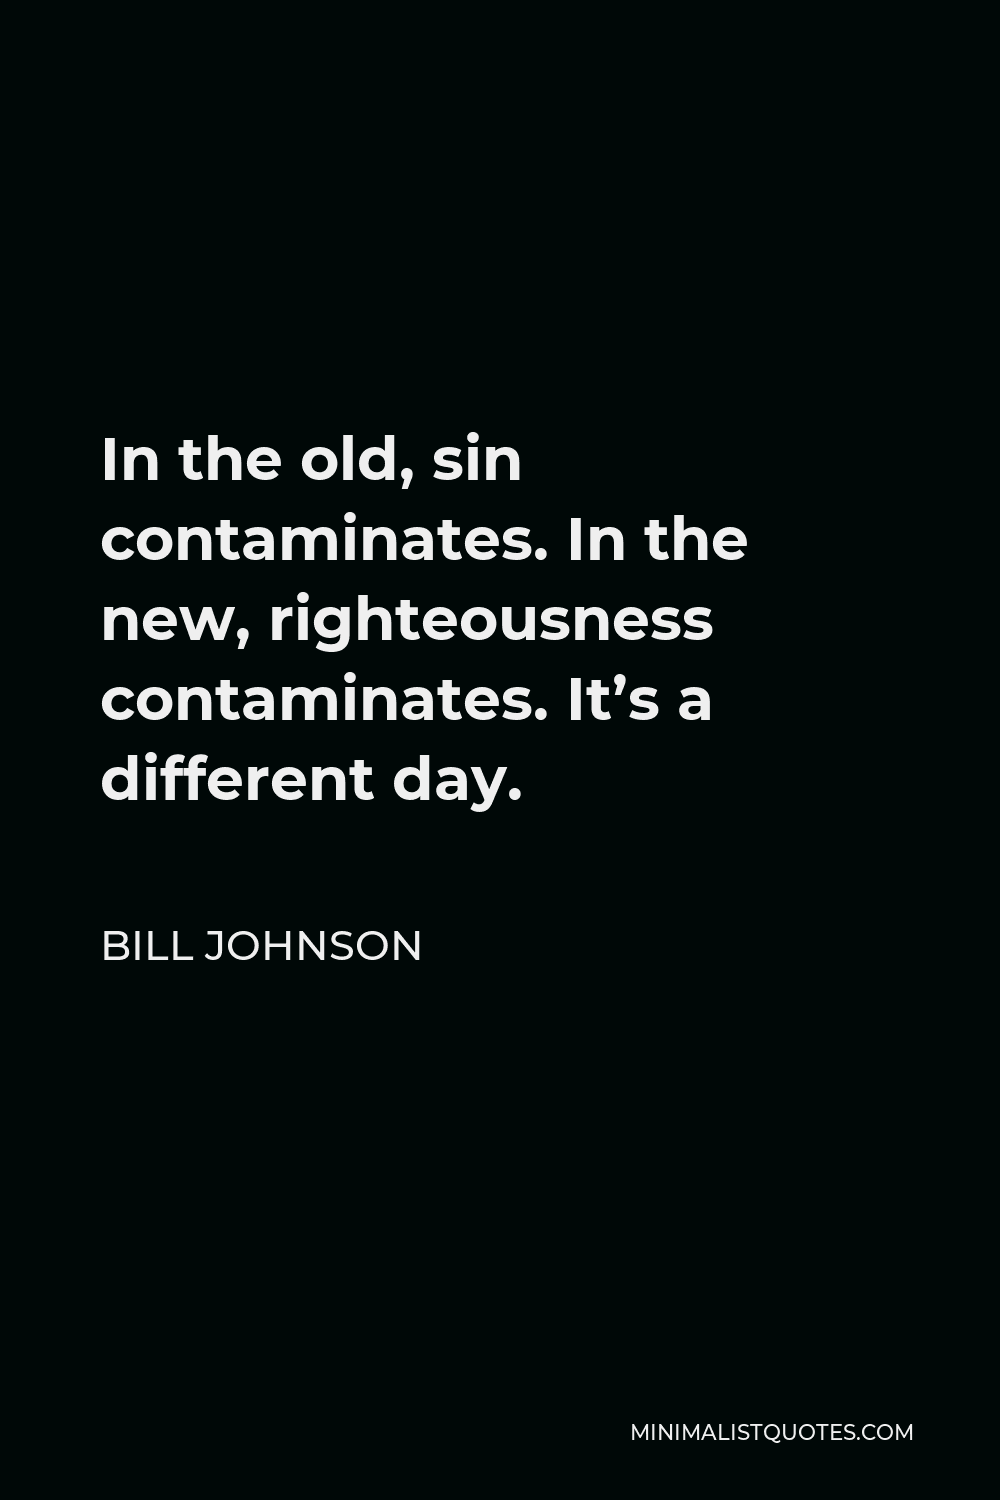 Bill Johnson Quote - In the old, sin contaminates. In the new, righteousness contaminates. It’s a different day.